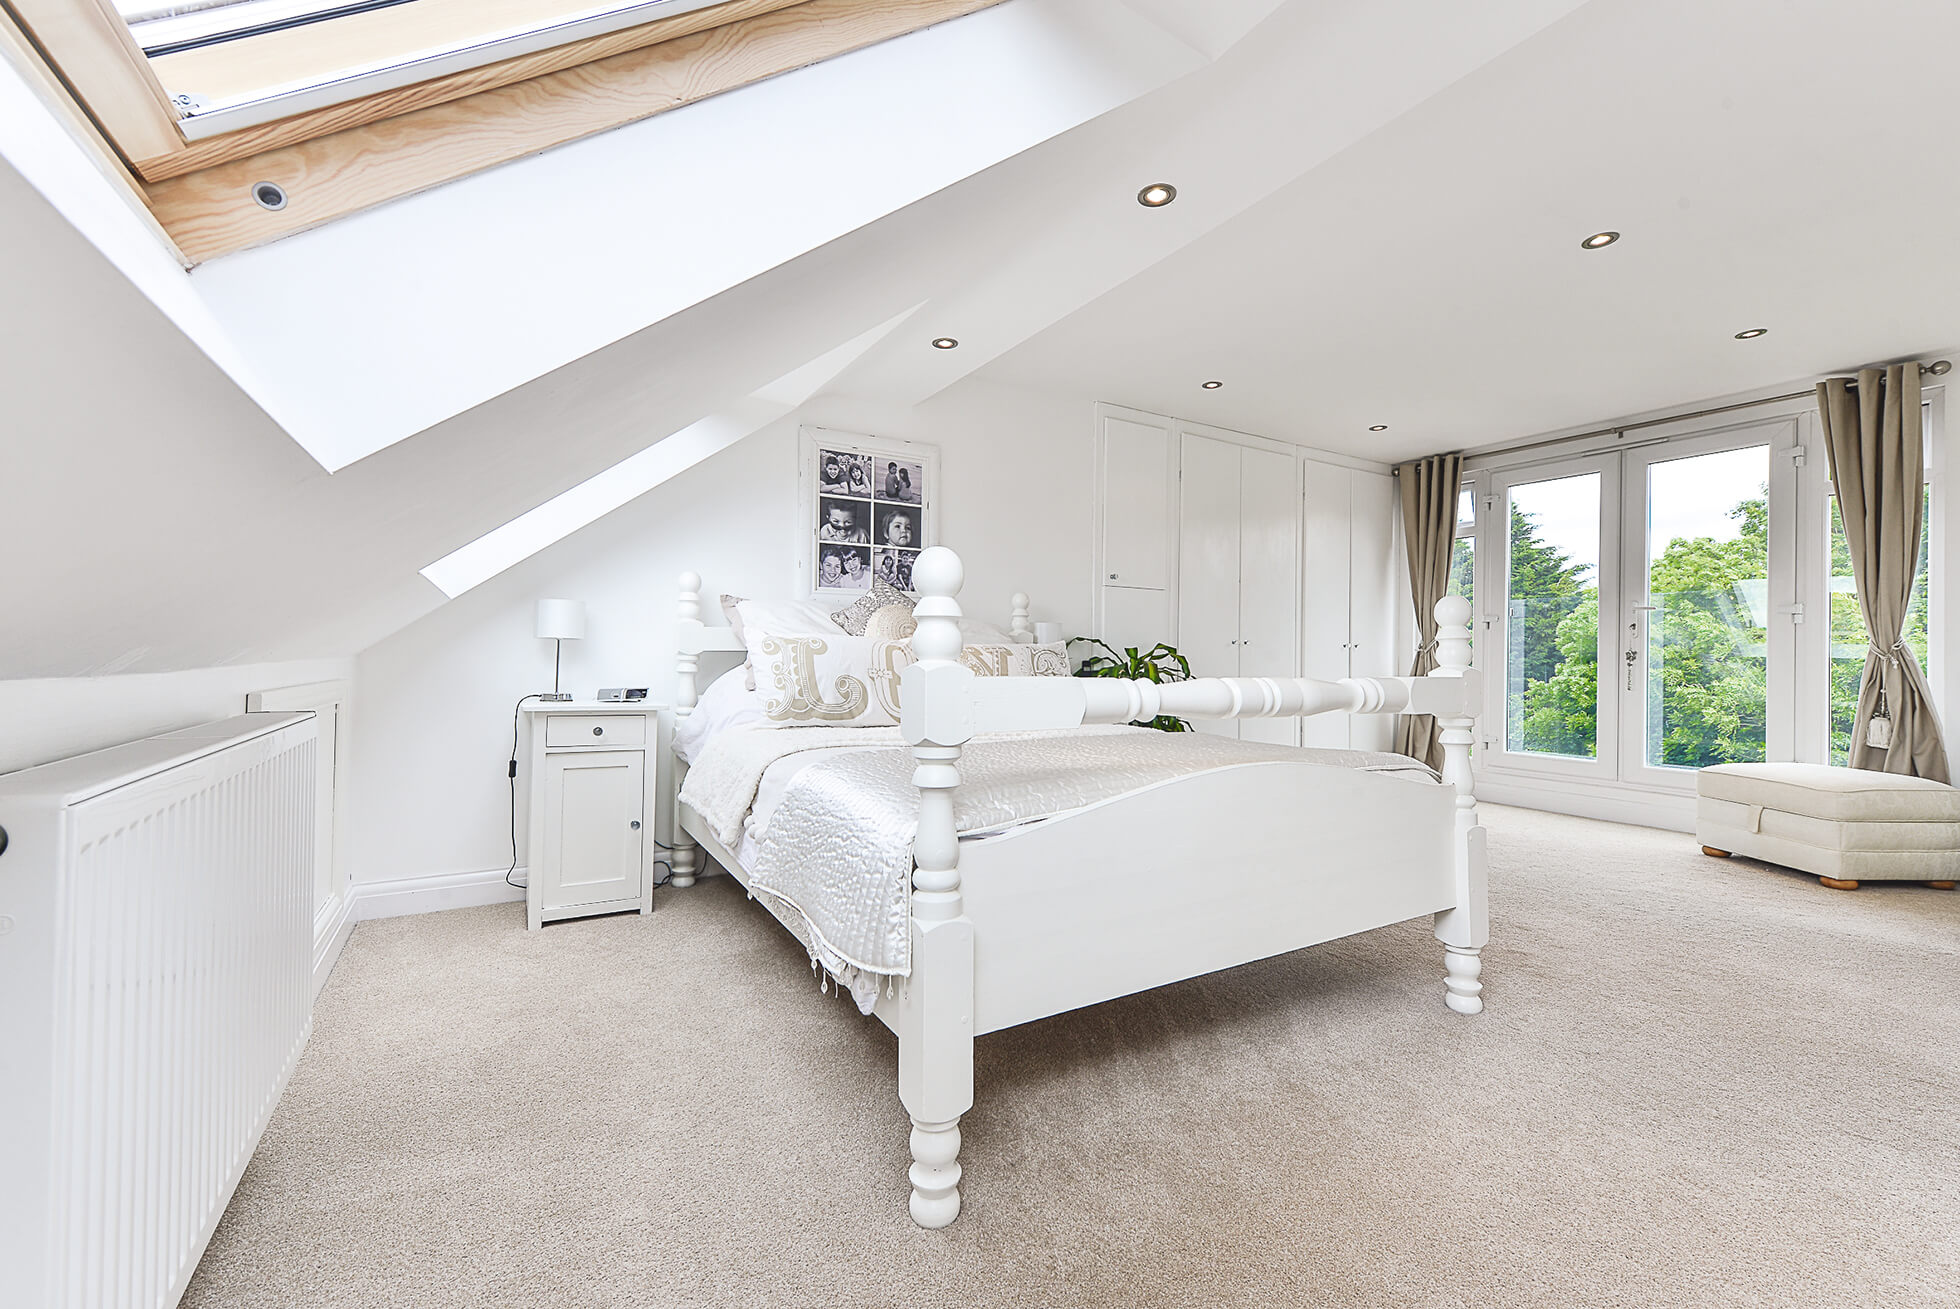 Do you have a question about converting your Loft in Welham Green? Here are the most popular questions asked by our clients.